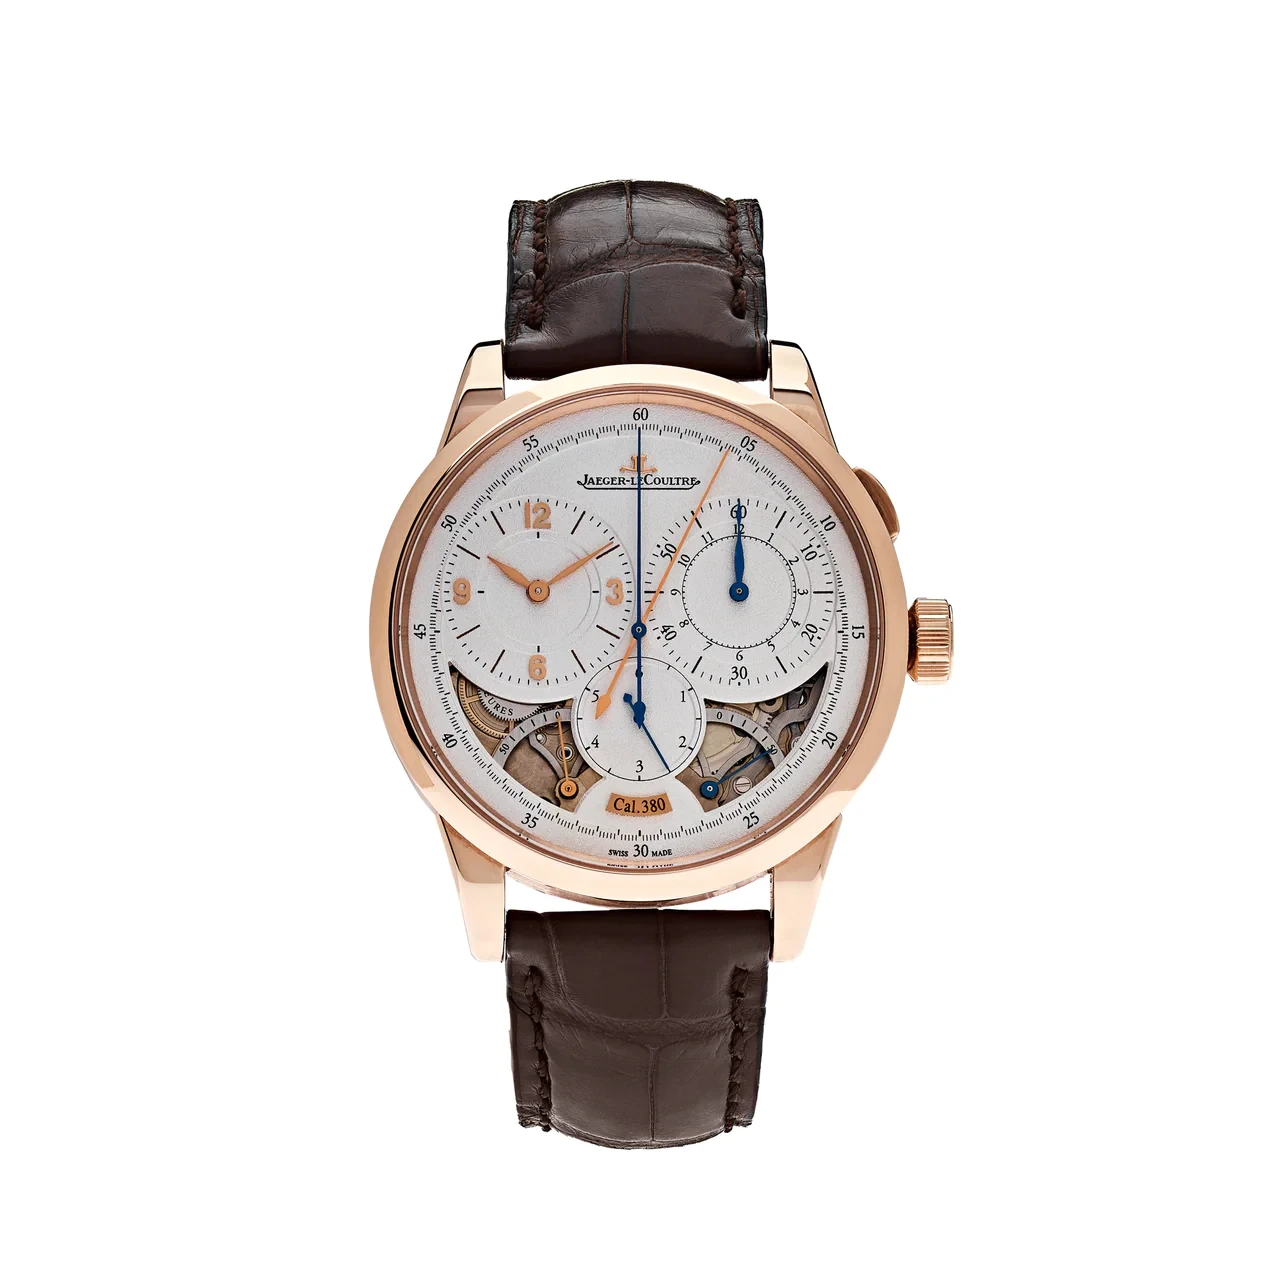 Jaeger-LeCoultre Duometre Chronograph Rose Gold  Q6012521 Listing Image 1